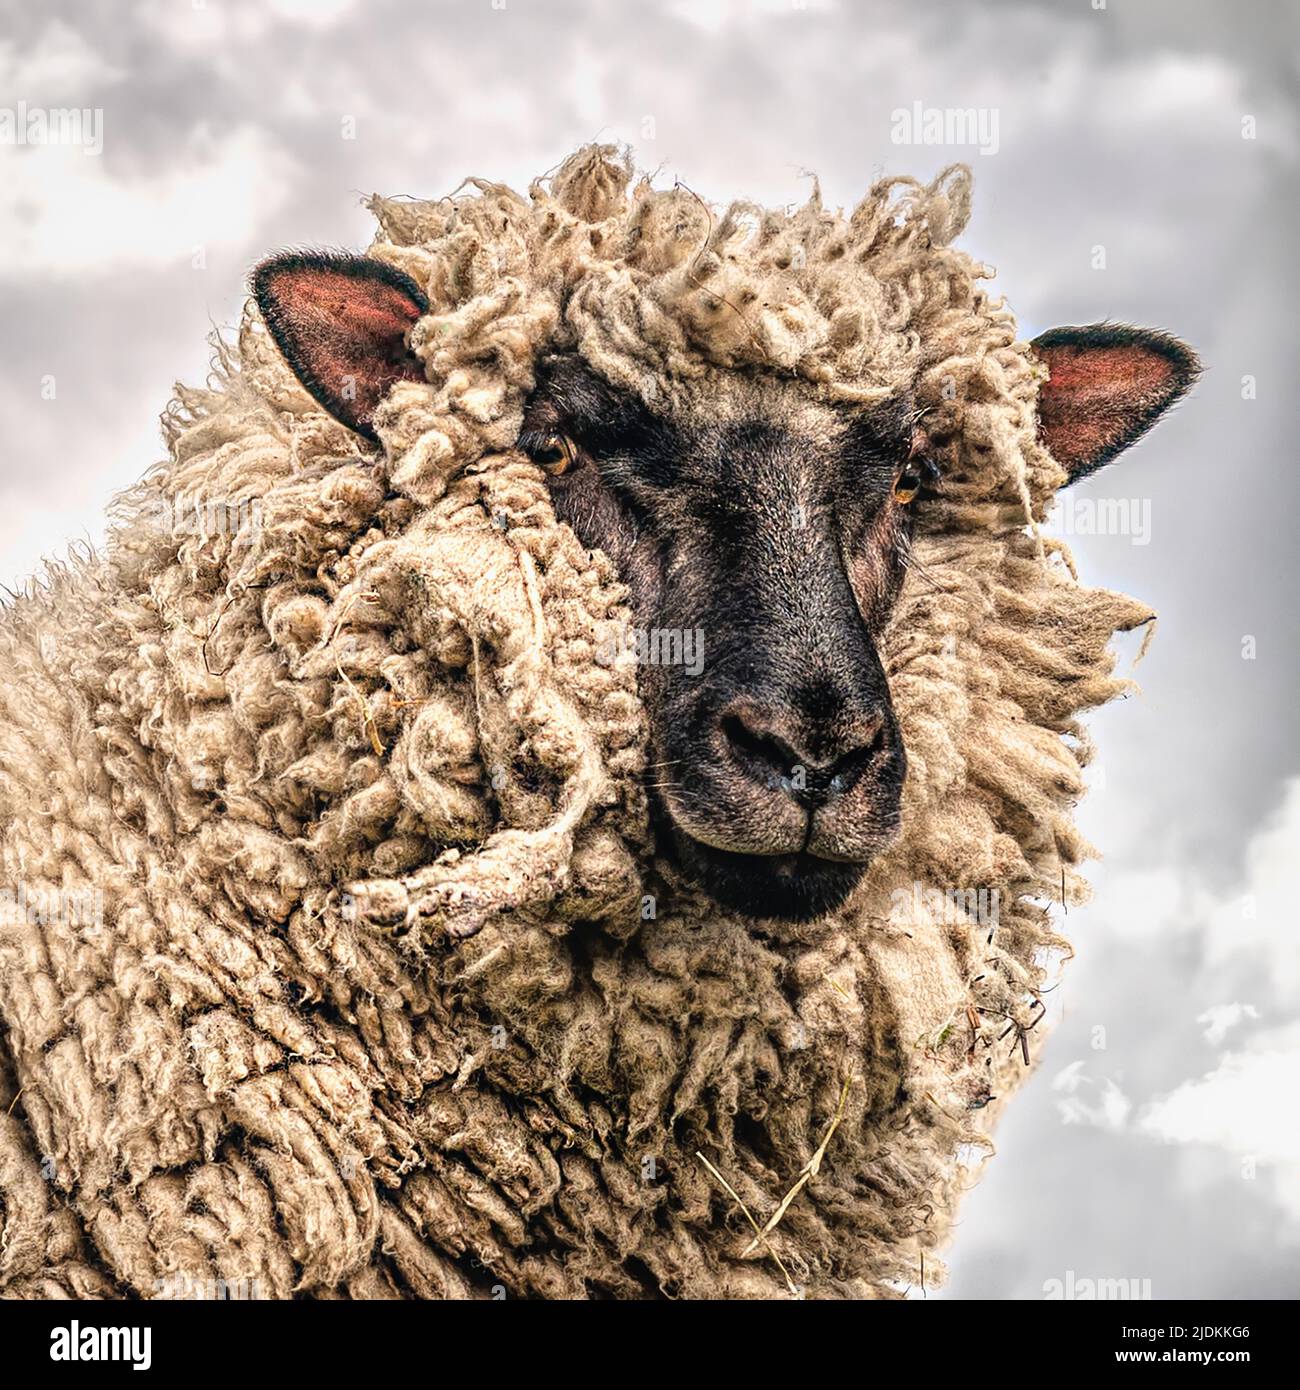 sheep with thick dense coat of wool Stock Photo